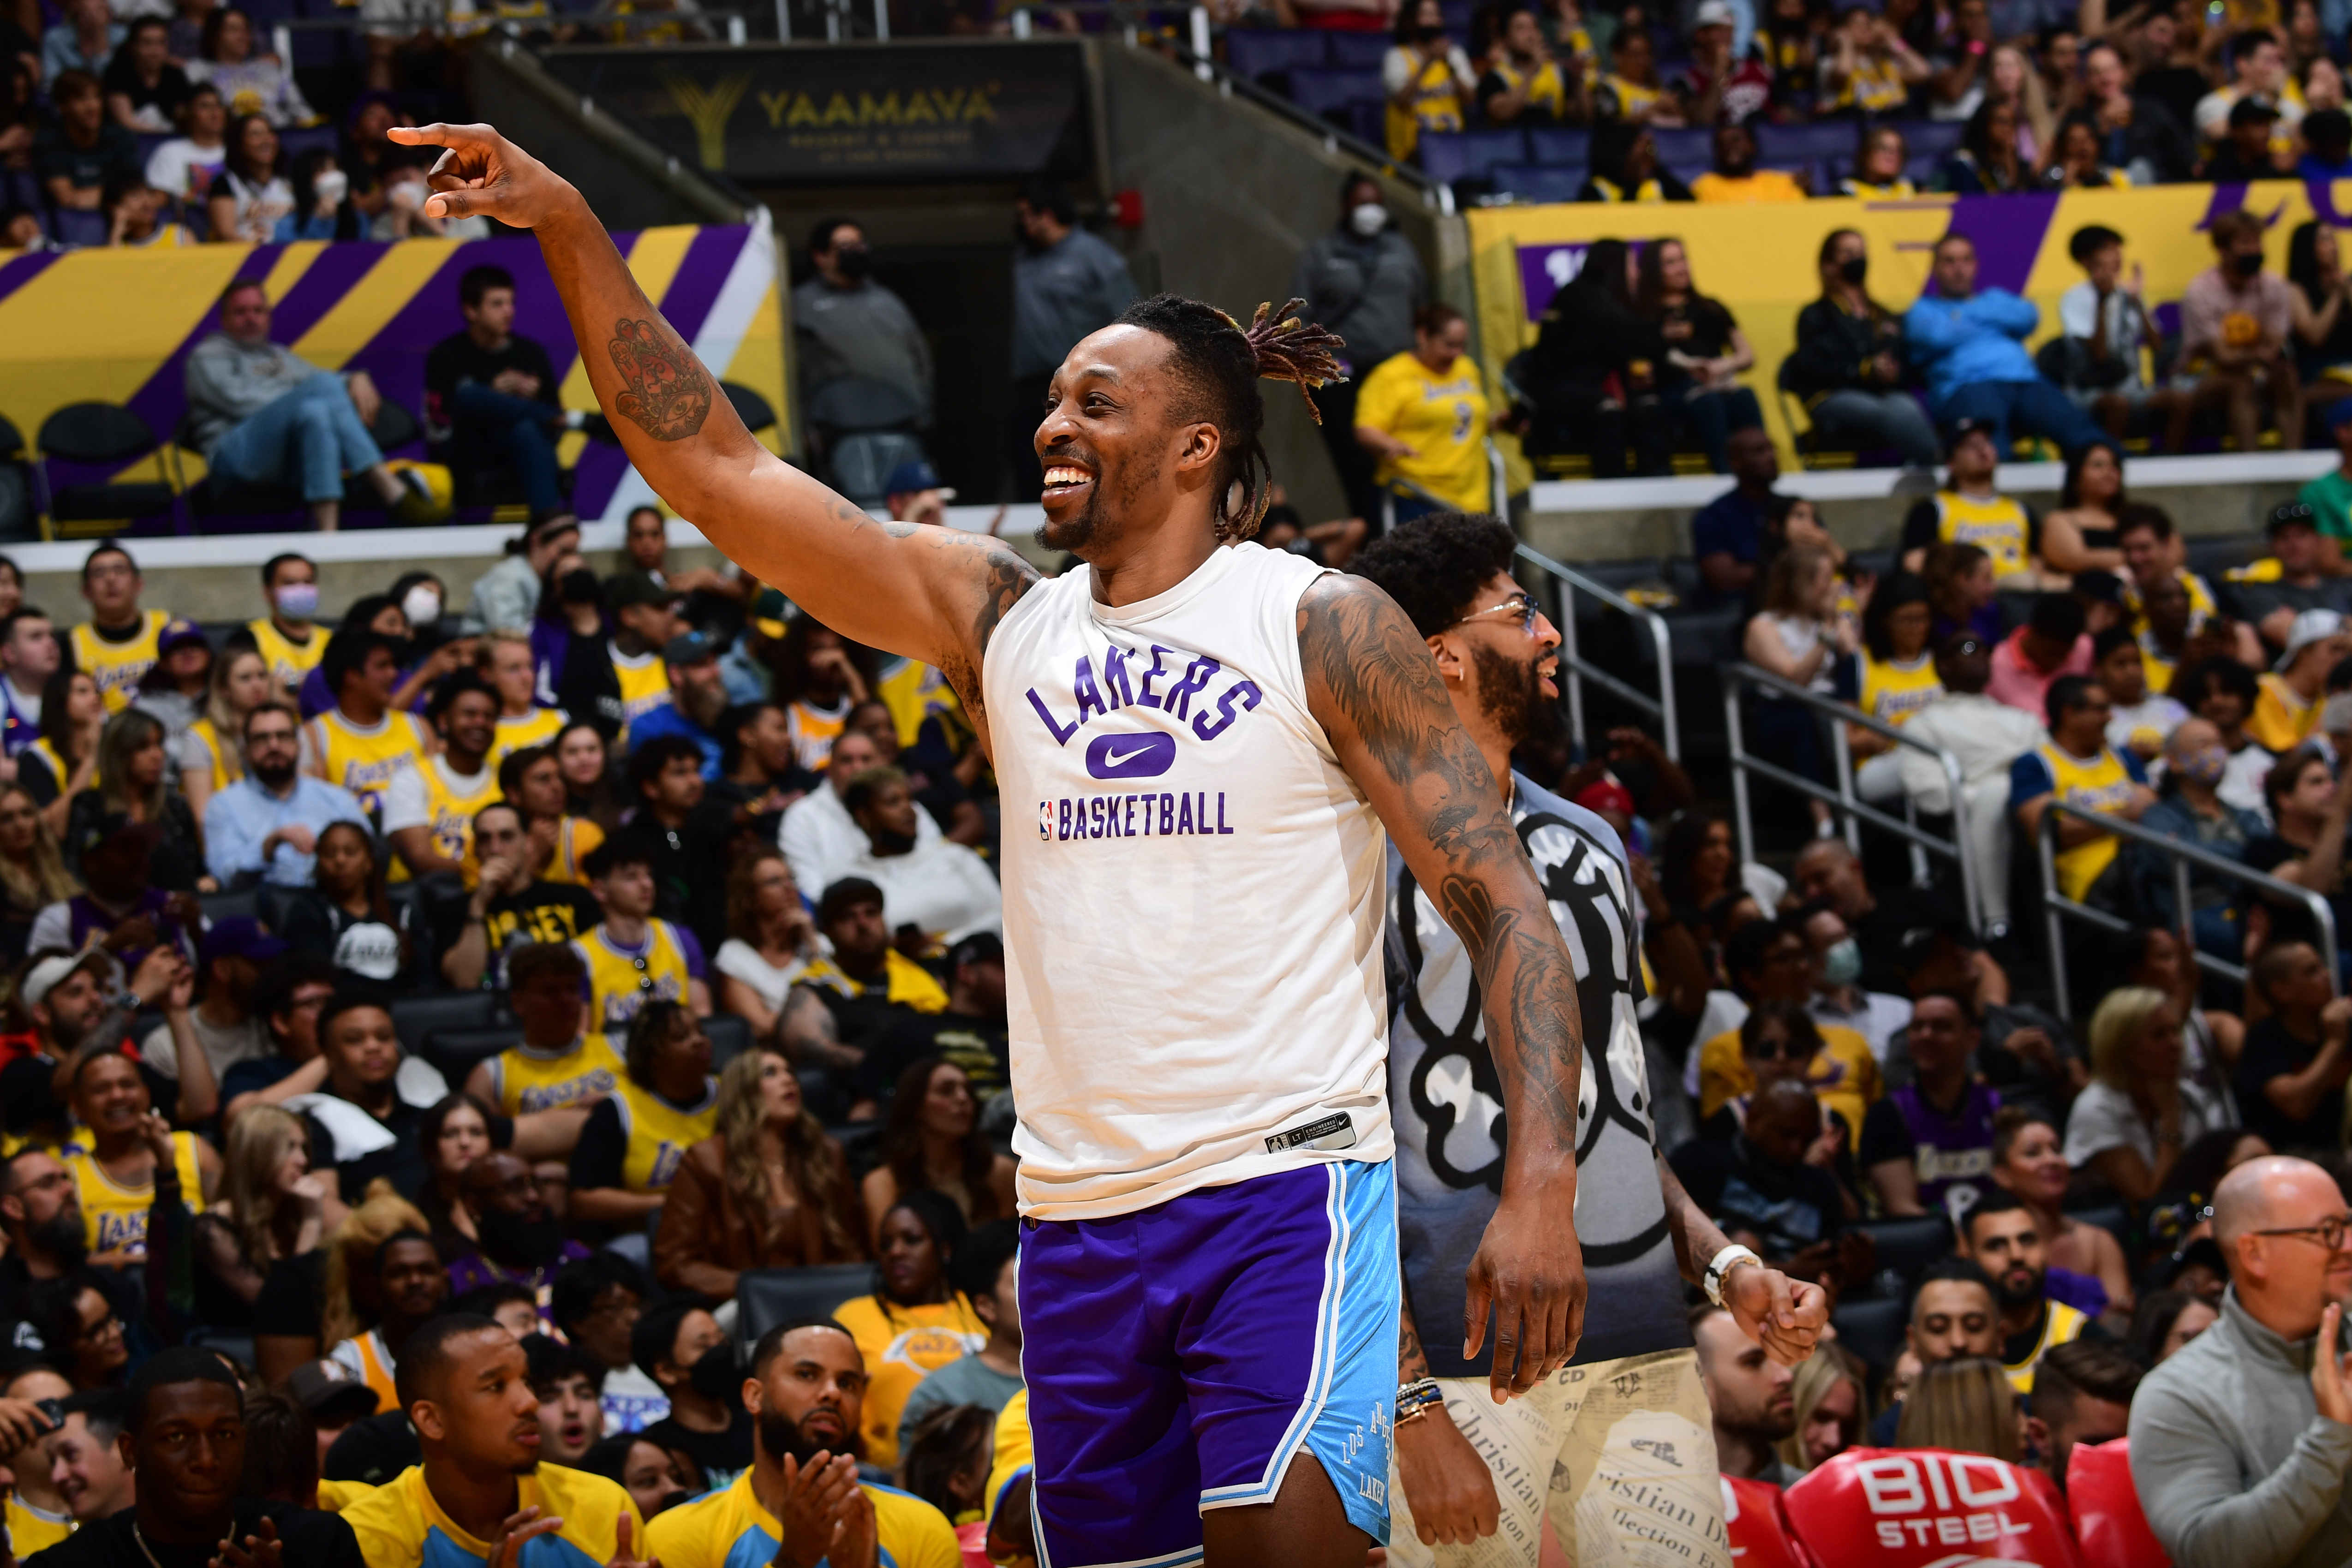 Lakers' Dwight Howard to start vs. Clippers on Friday, Frank Vogel